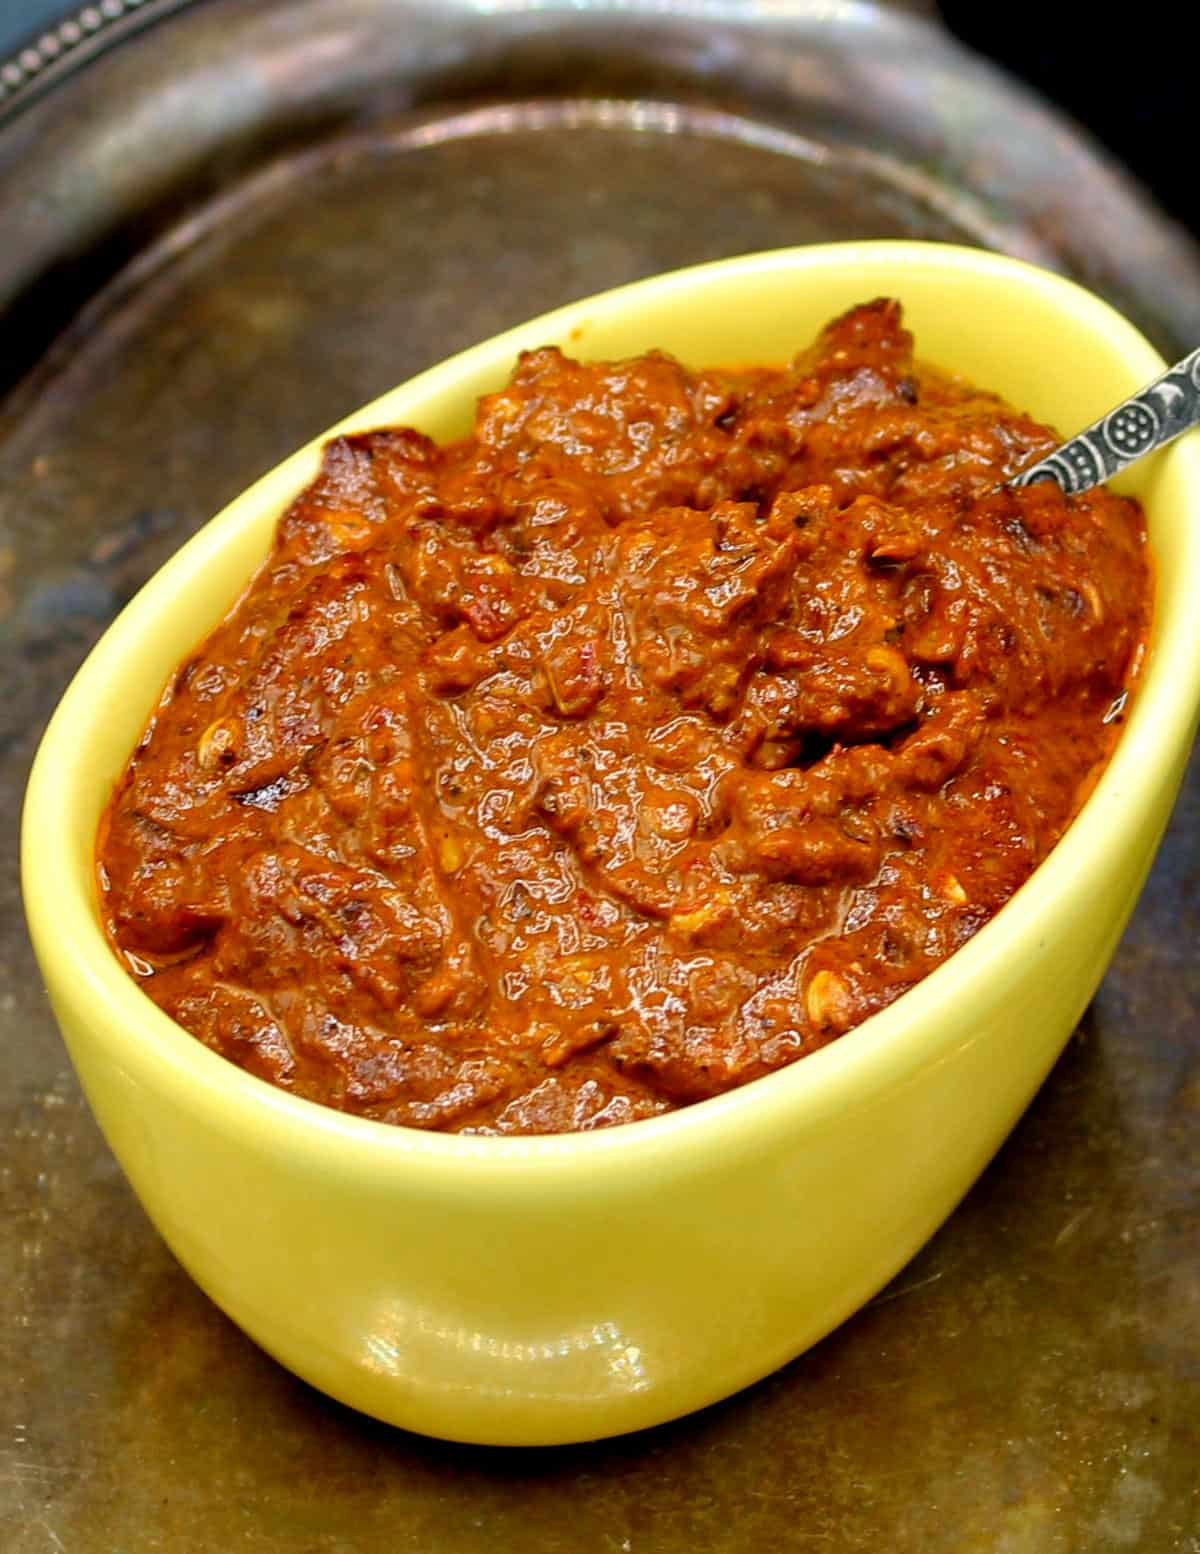 Harissa paste in a yellow bowl with spoon.